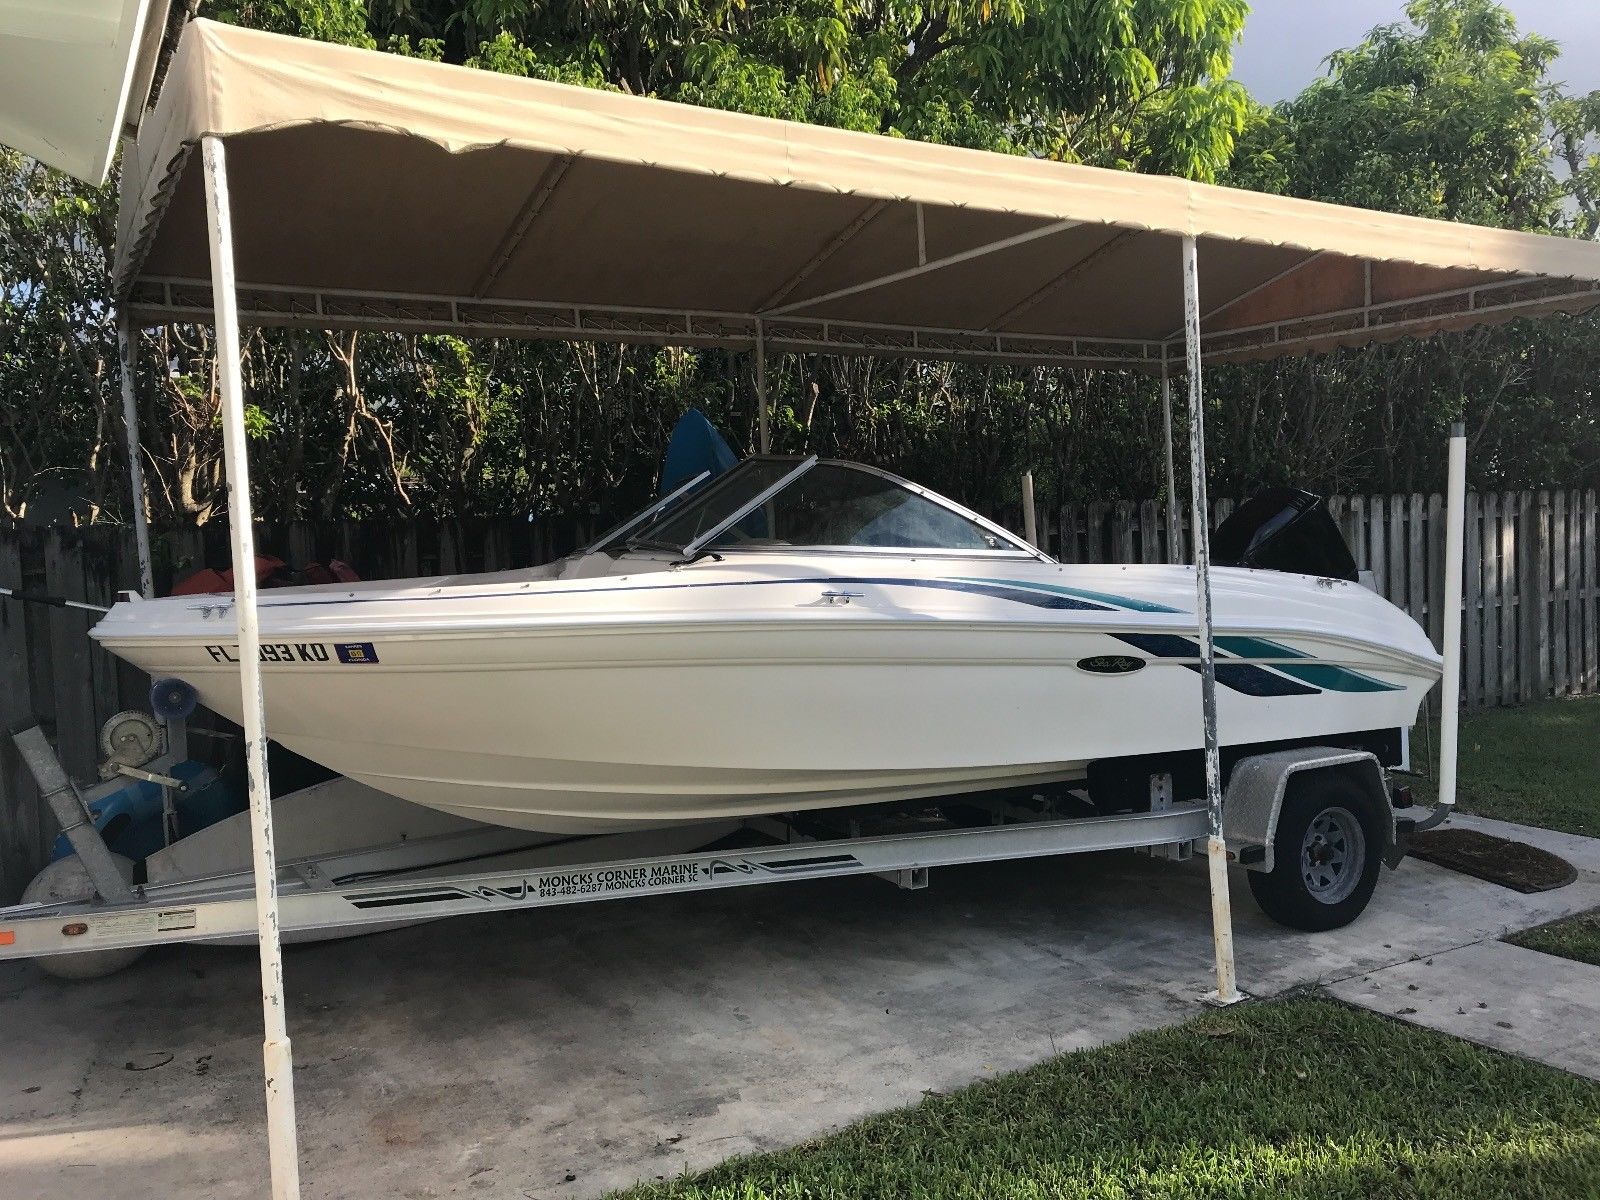 Sea Ray 180 Outboard 1998 for sale for $1,000 - Boats-from-USA.com